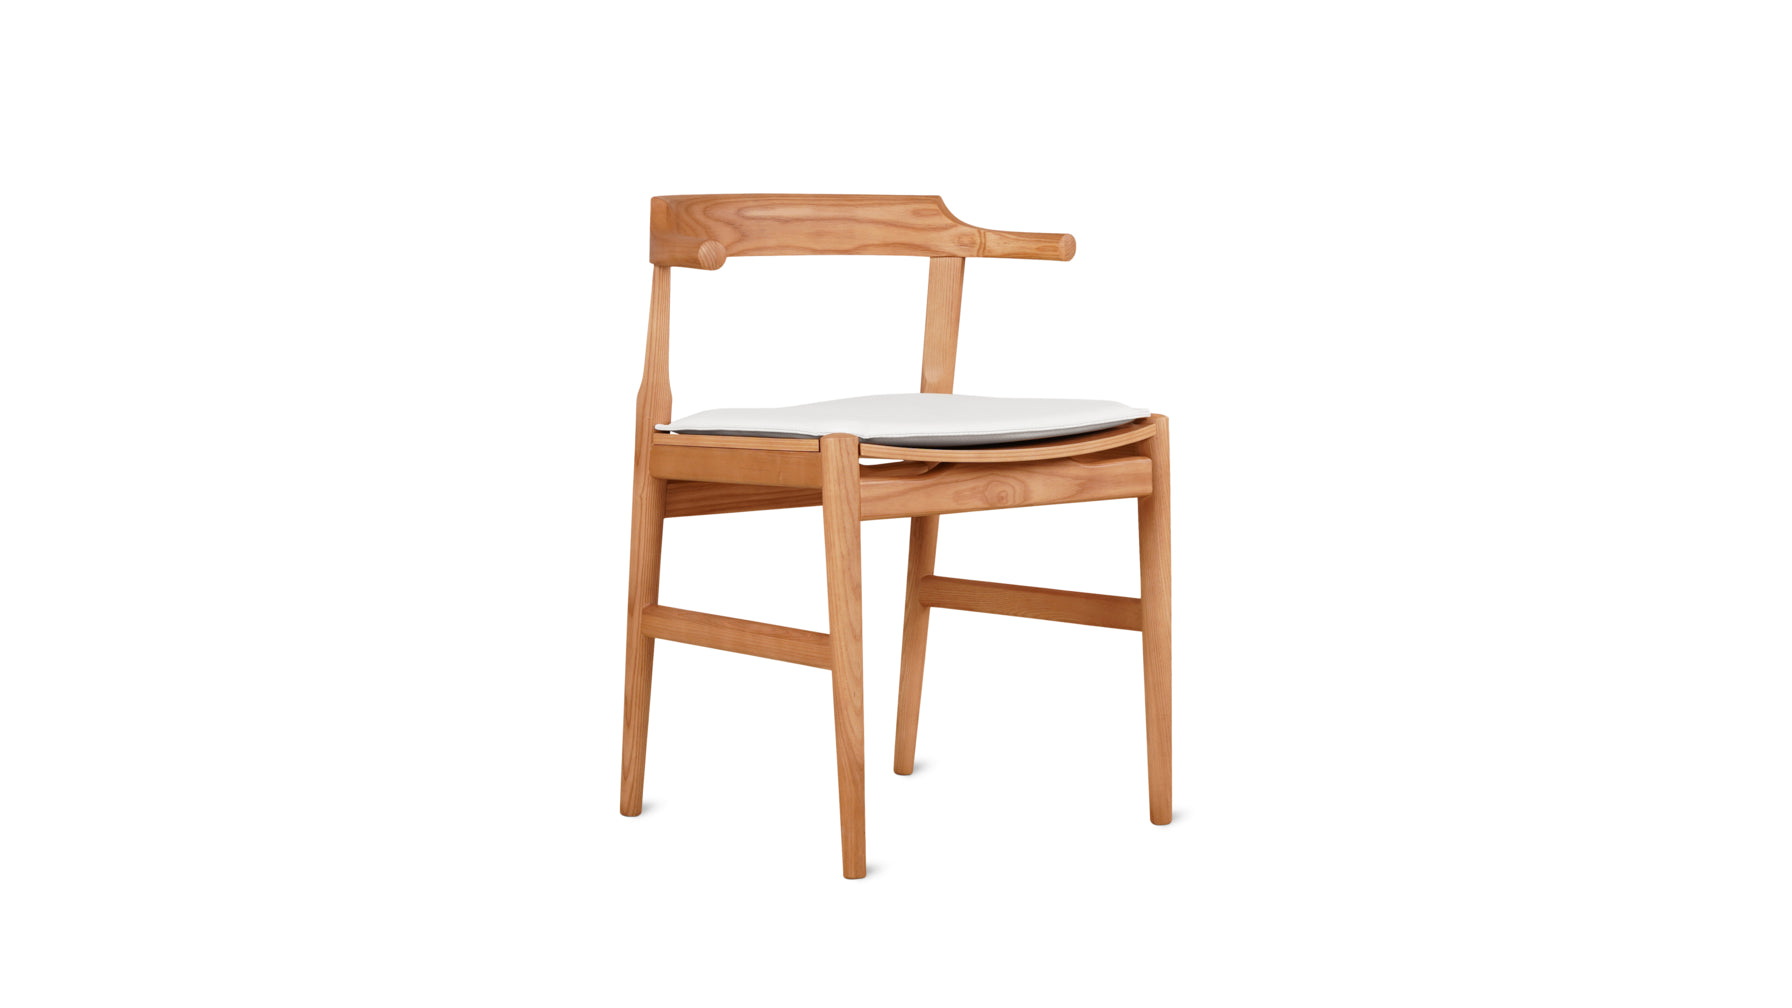 Tuck In Dining Chair with Cushion, White Oak, Wood Seat with White Cushion - Image 4